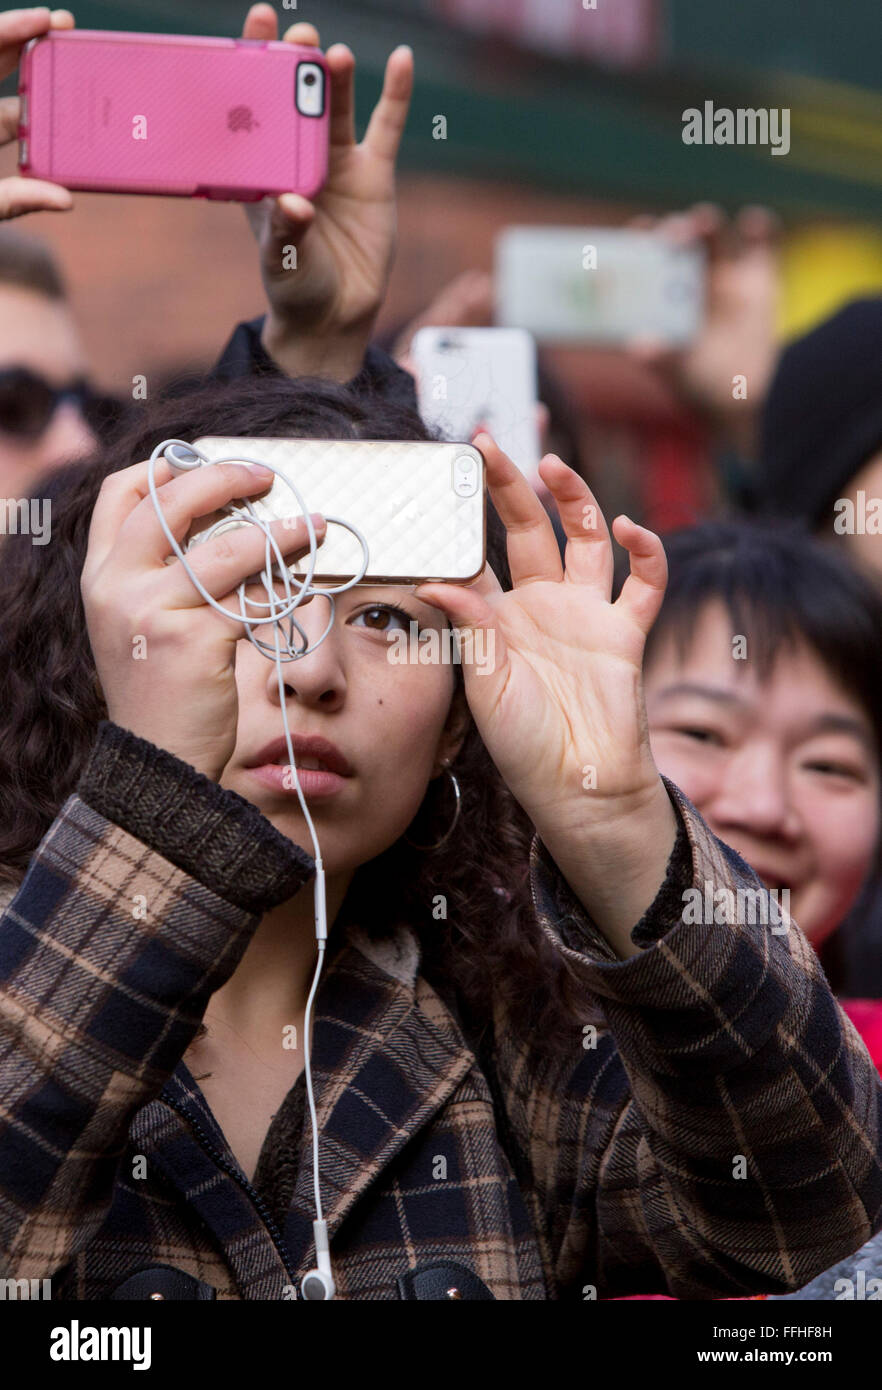 Manchester celebrates Chinese New Year today. Crowds take photos on their phones Stock Photo